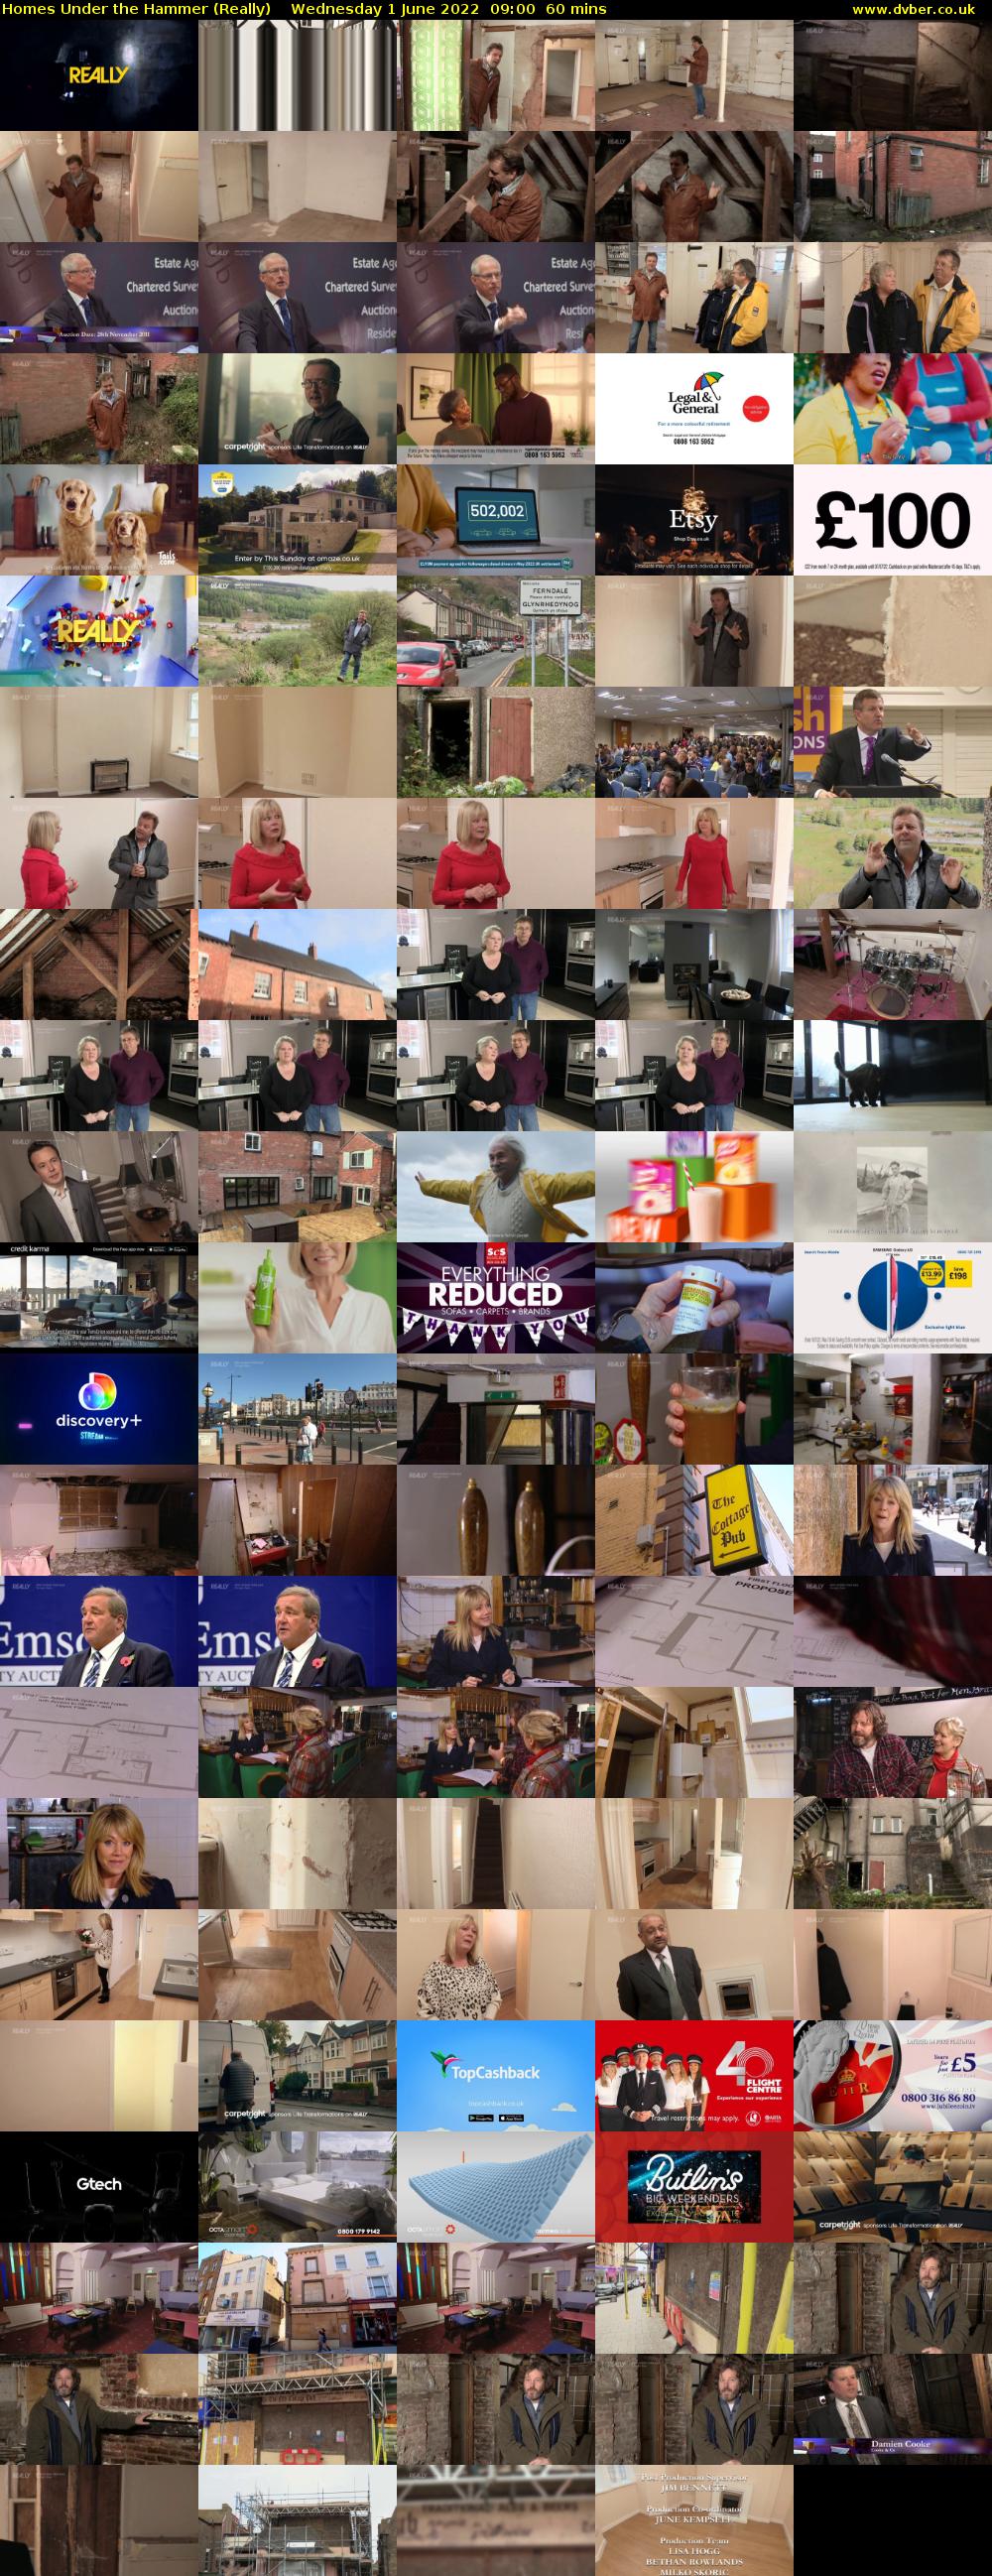 Homes Under the Hammer (Really) Wednesday 1 June 2022 09:00 - 10:00